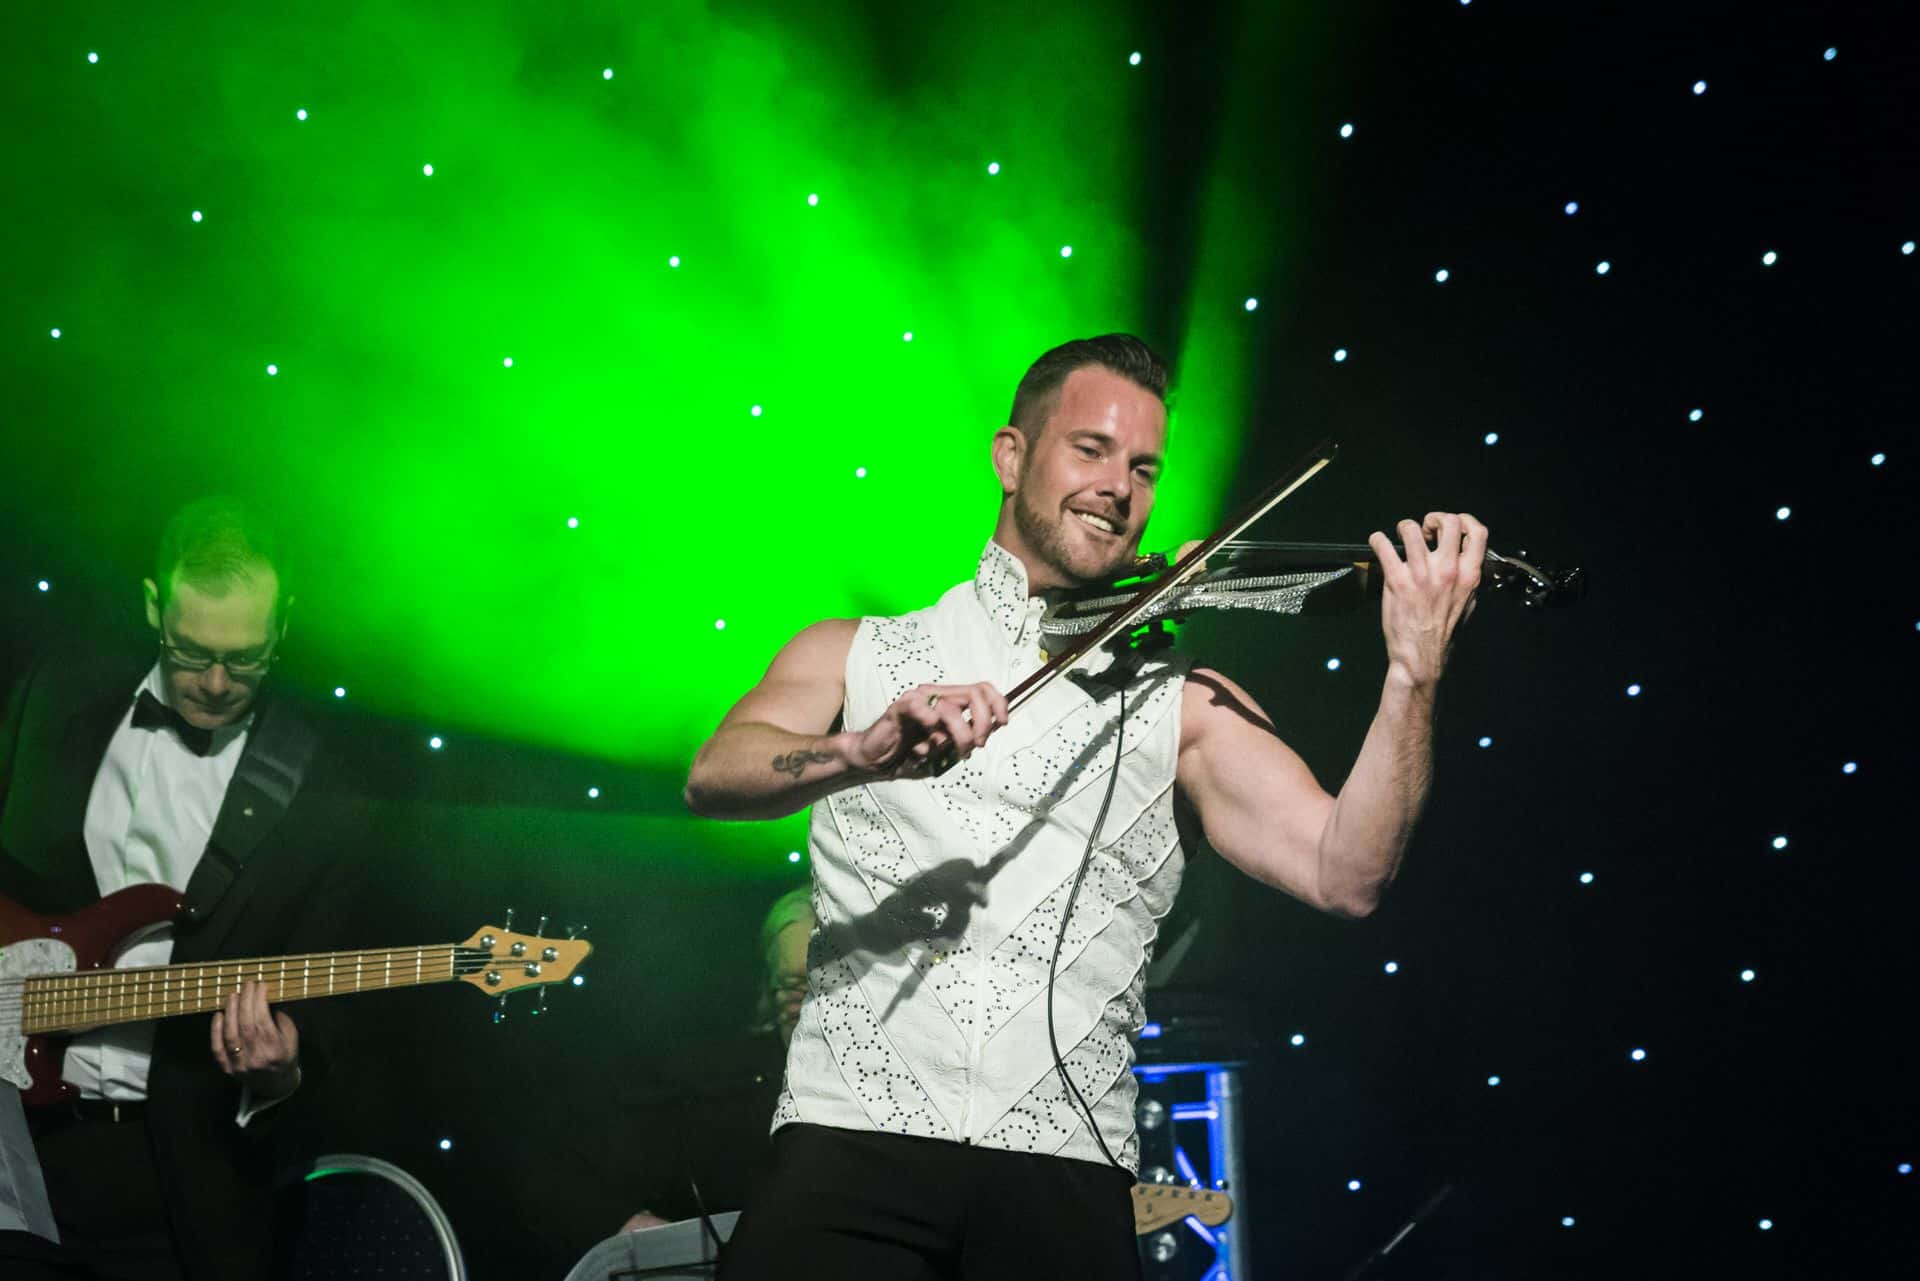 A man playing violin on stage in front of green lights.